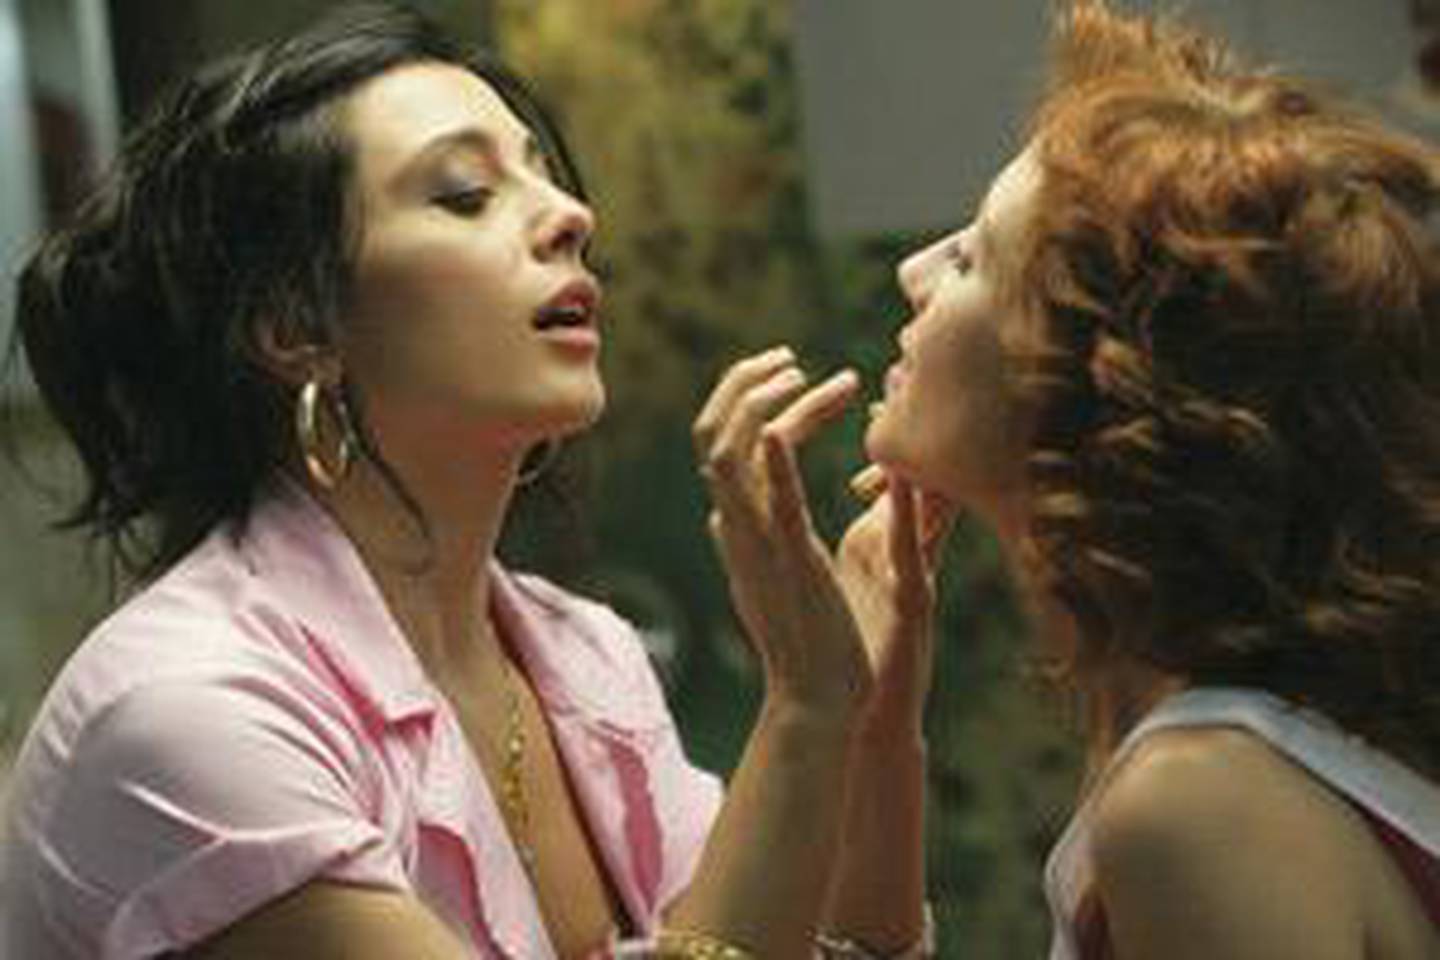 Nadine Labaki directed and played a major role in the 2007 Lebanese film, Caramel.